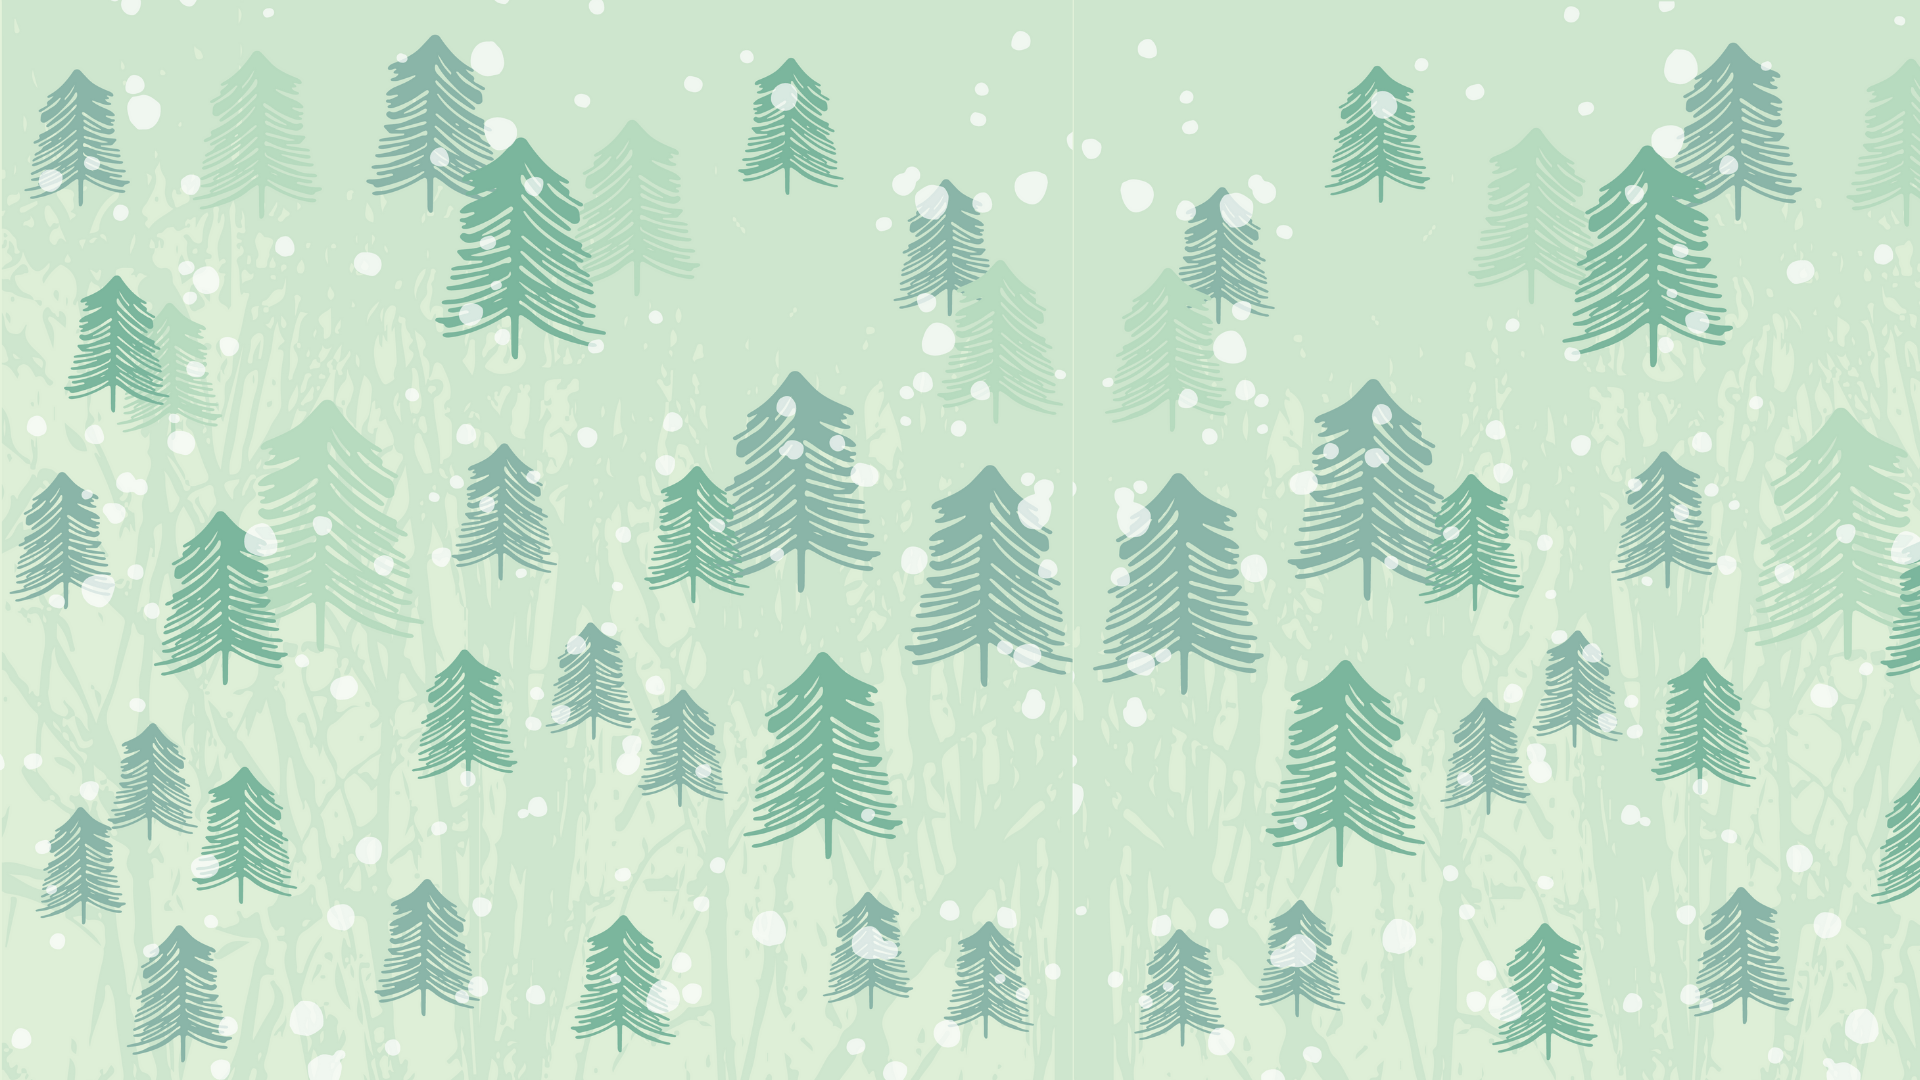 A pattern of trees and snow on green background - Pastel